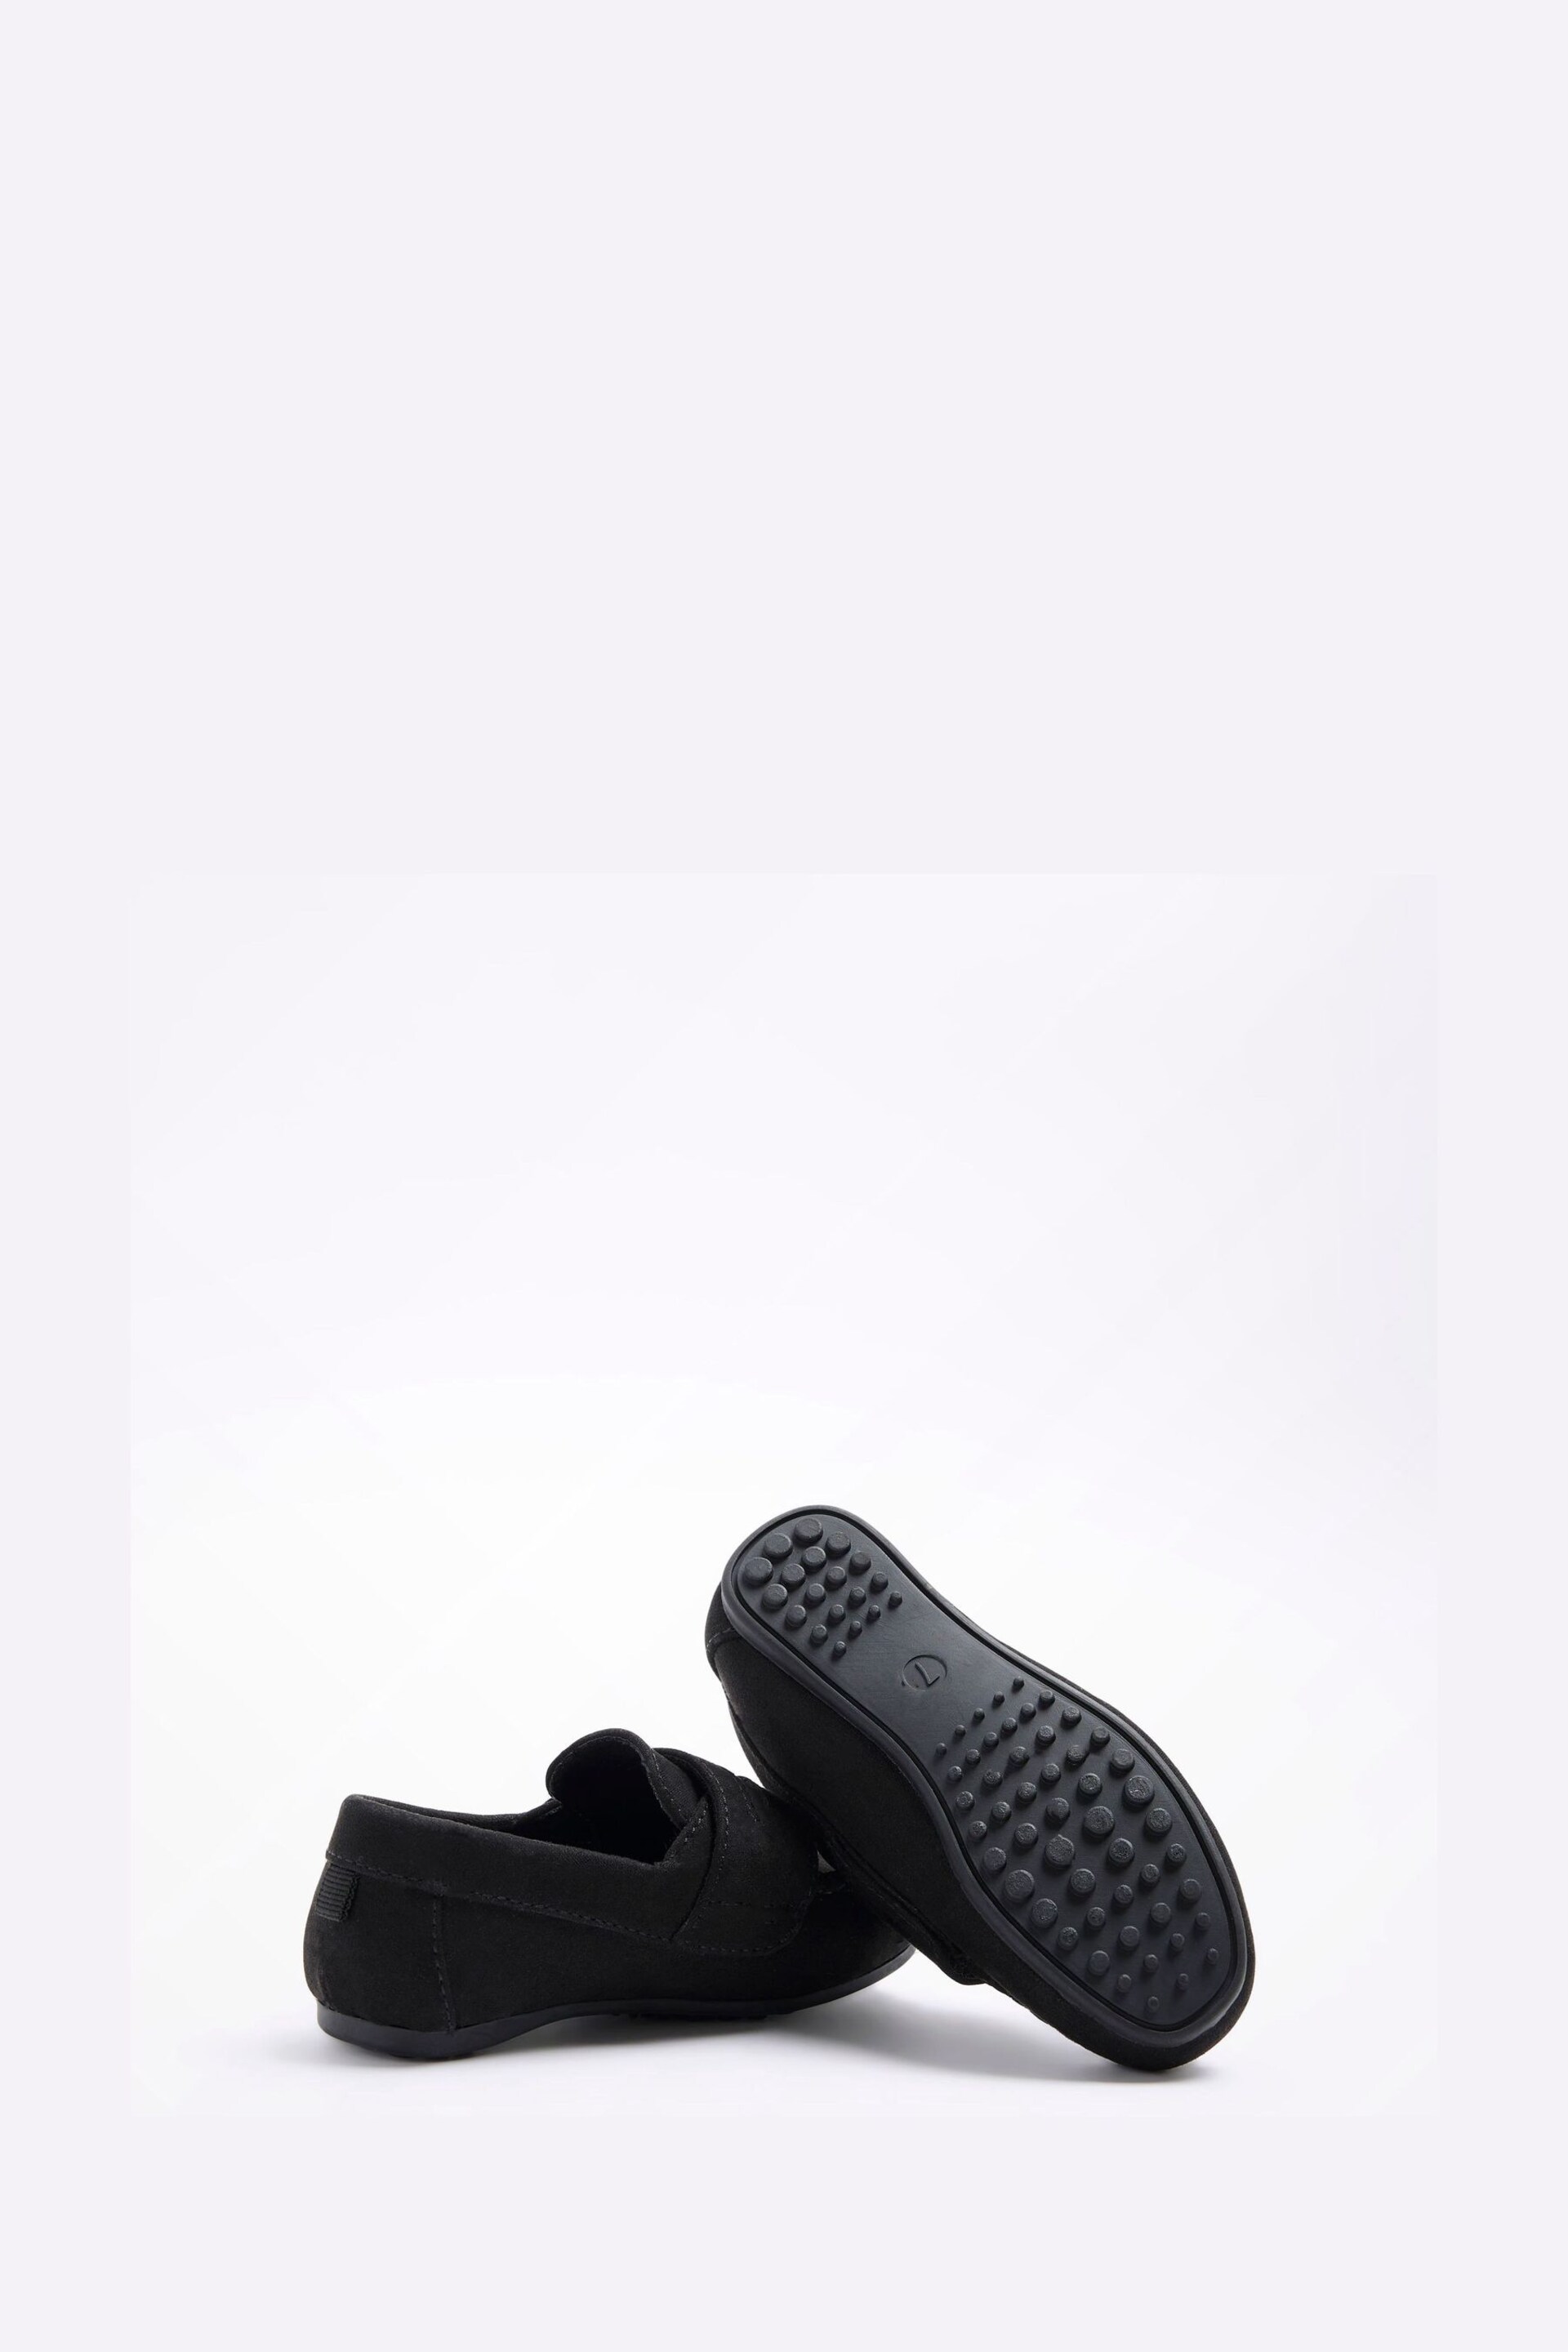 River Island Black Boys Velcro Loafers - Image 4 of 4